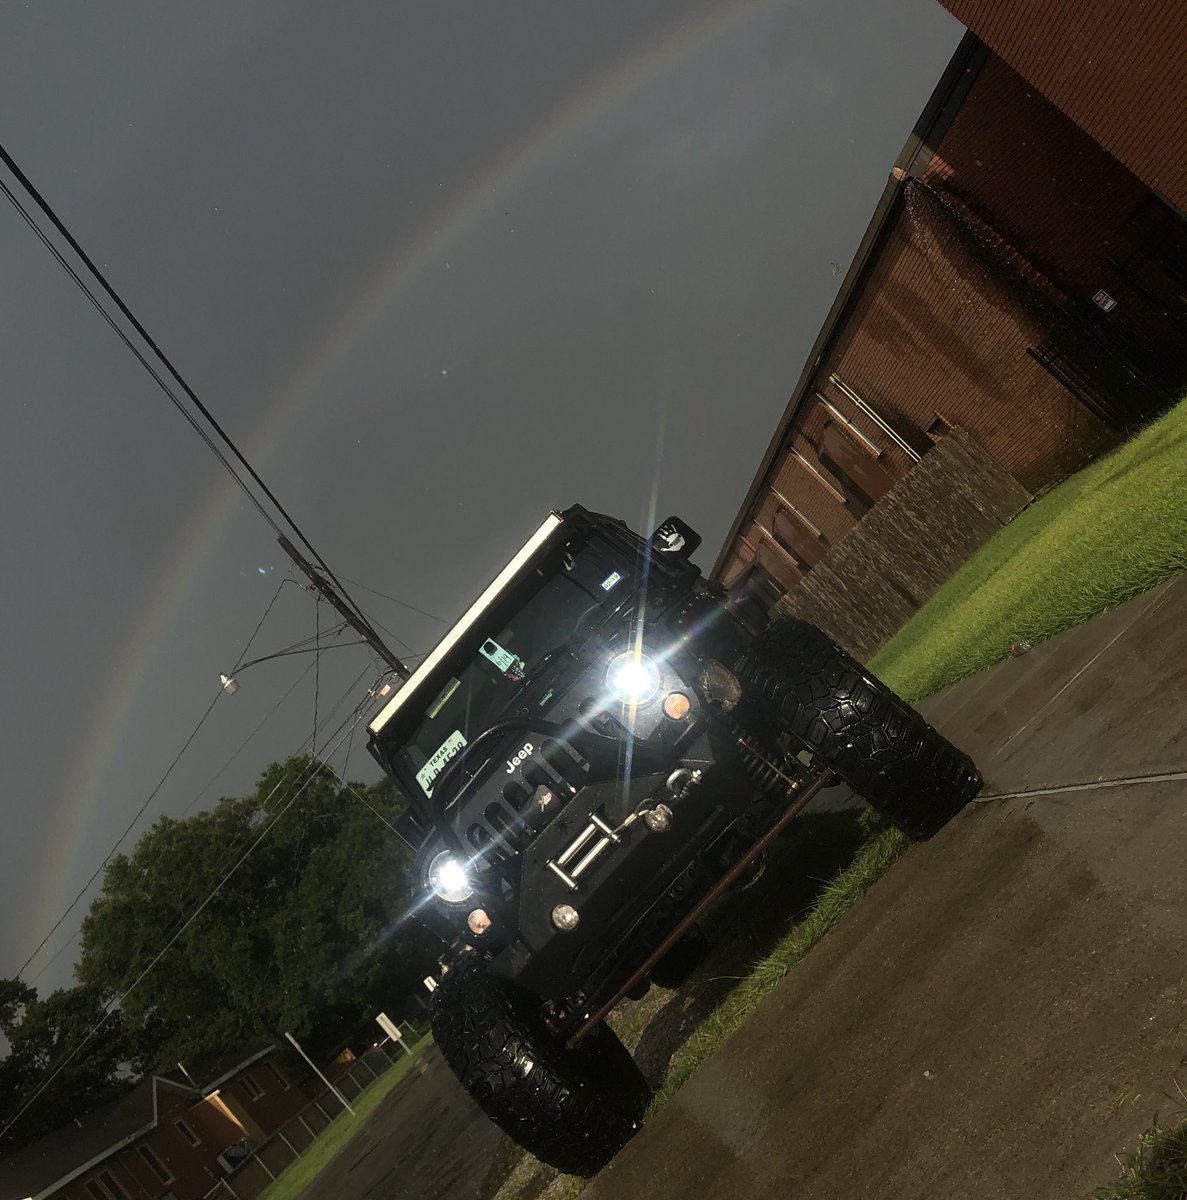 Remember no matter what your going through, there’s always a rainbow after a huge storm ❤️ #jeepher #ollllllo #crawlher #spiderwebshade #aeroxindustries #poisonspyder #hidprojectors